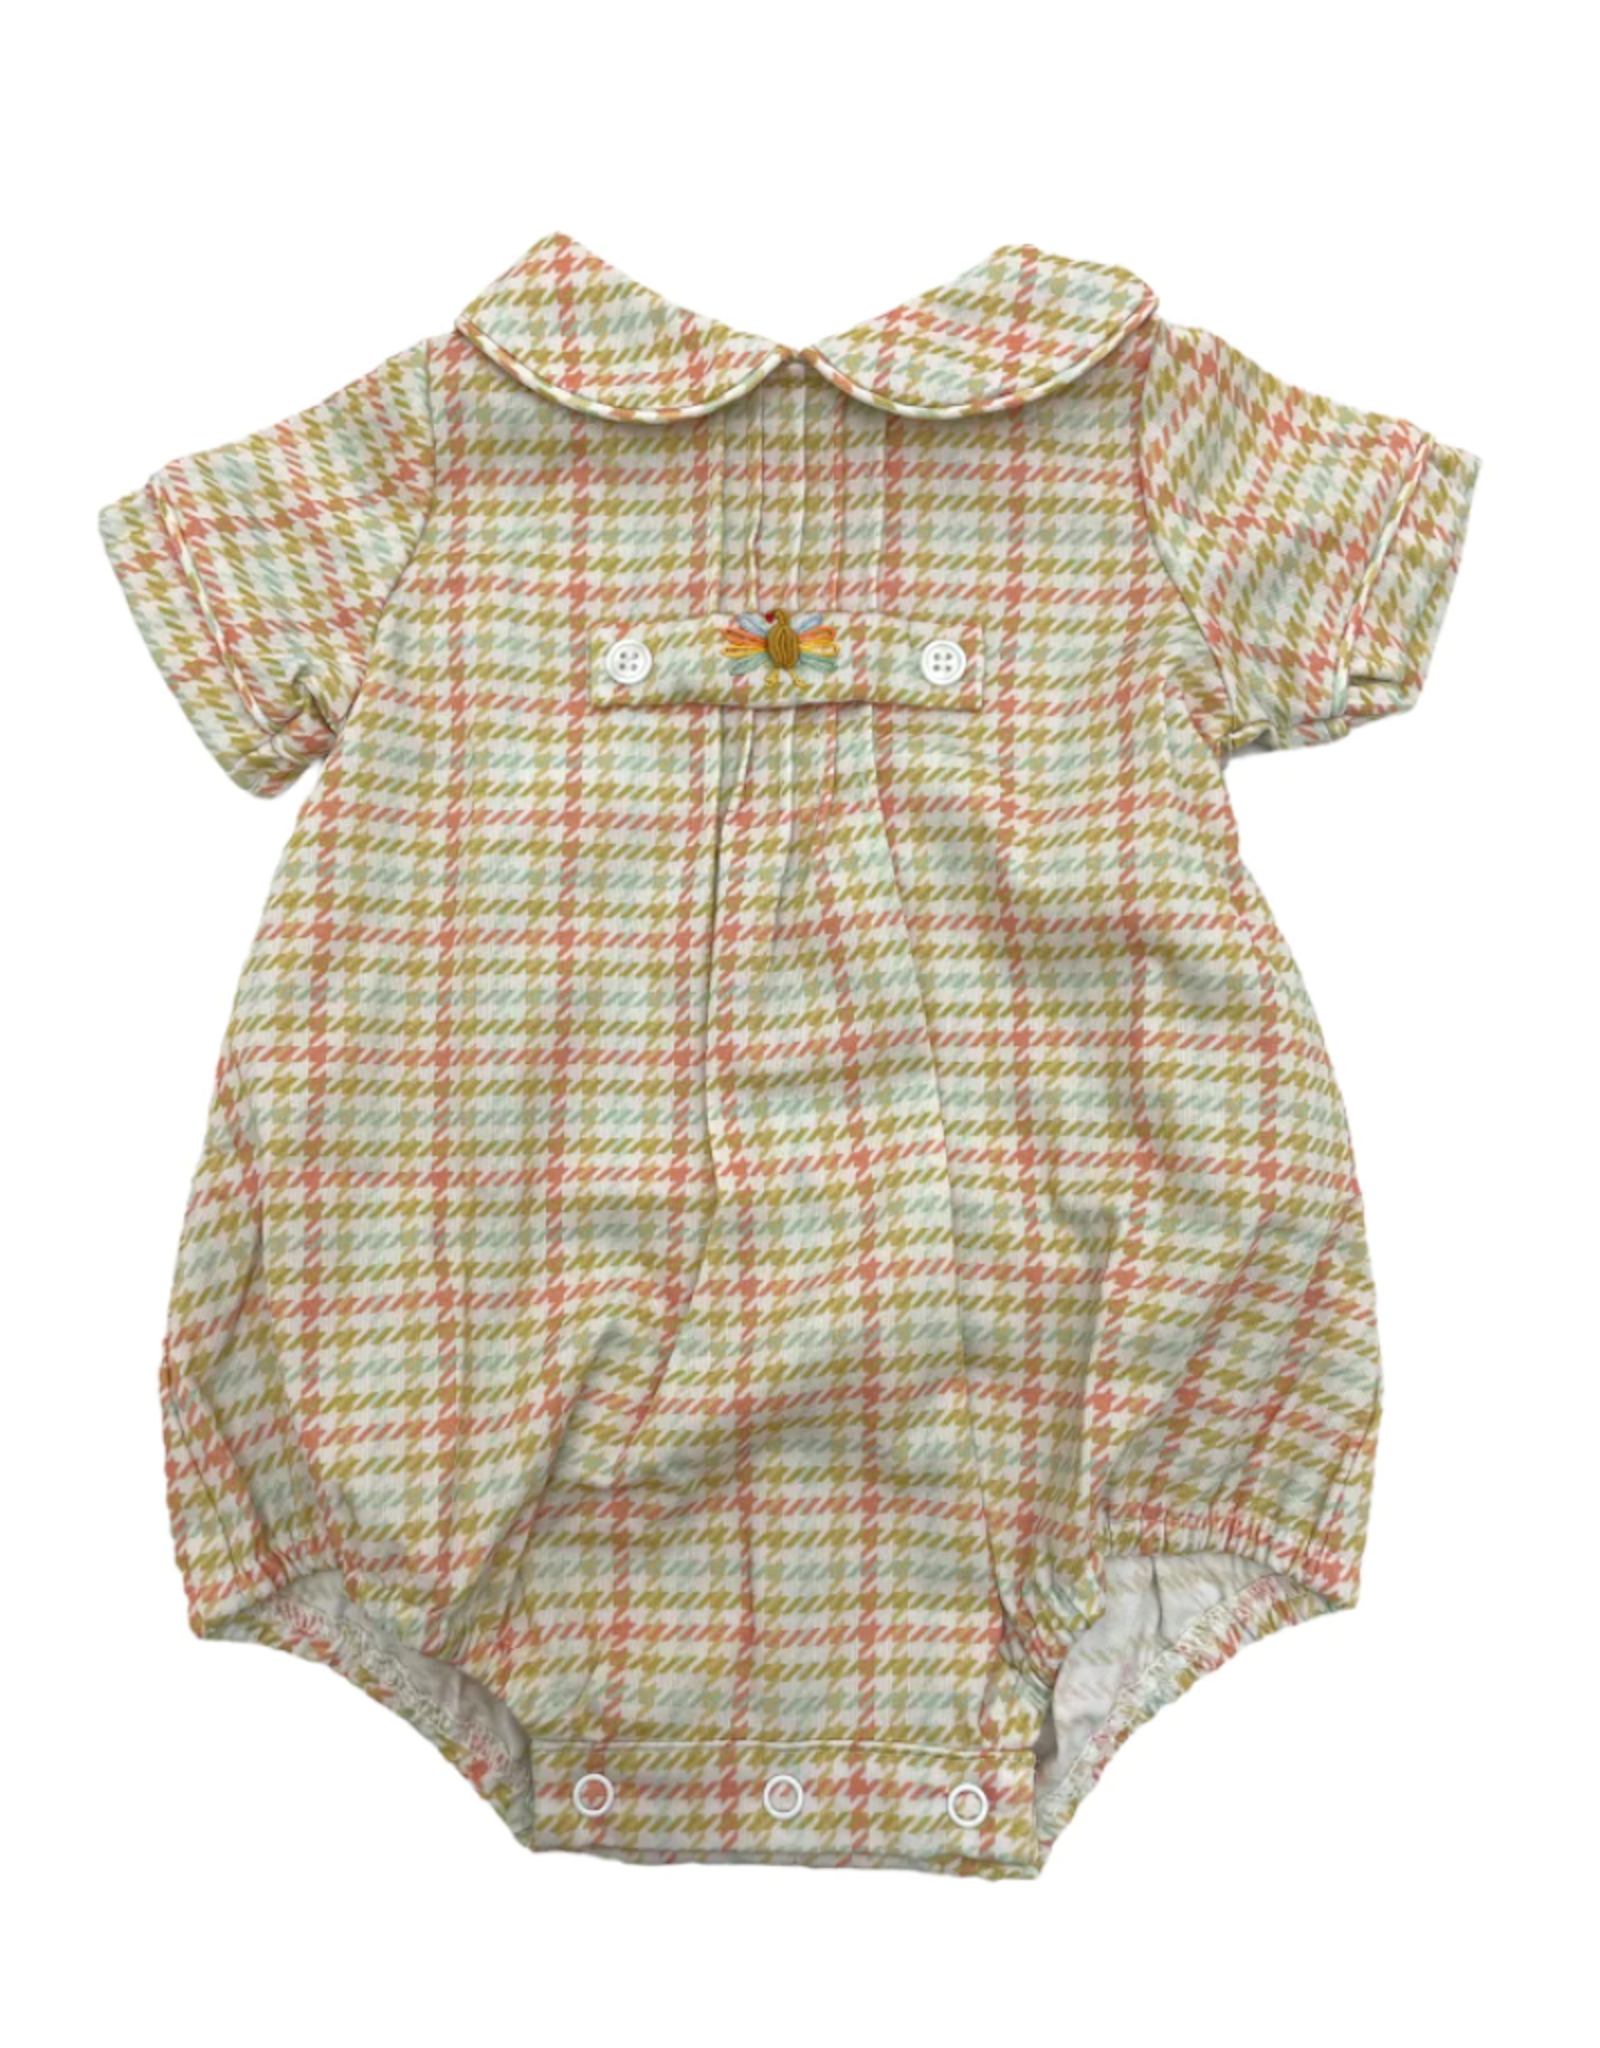 Peggy Green Anderson Bubble, Butternut Plaid with Turkey Tab, 2T